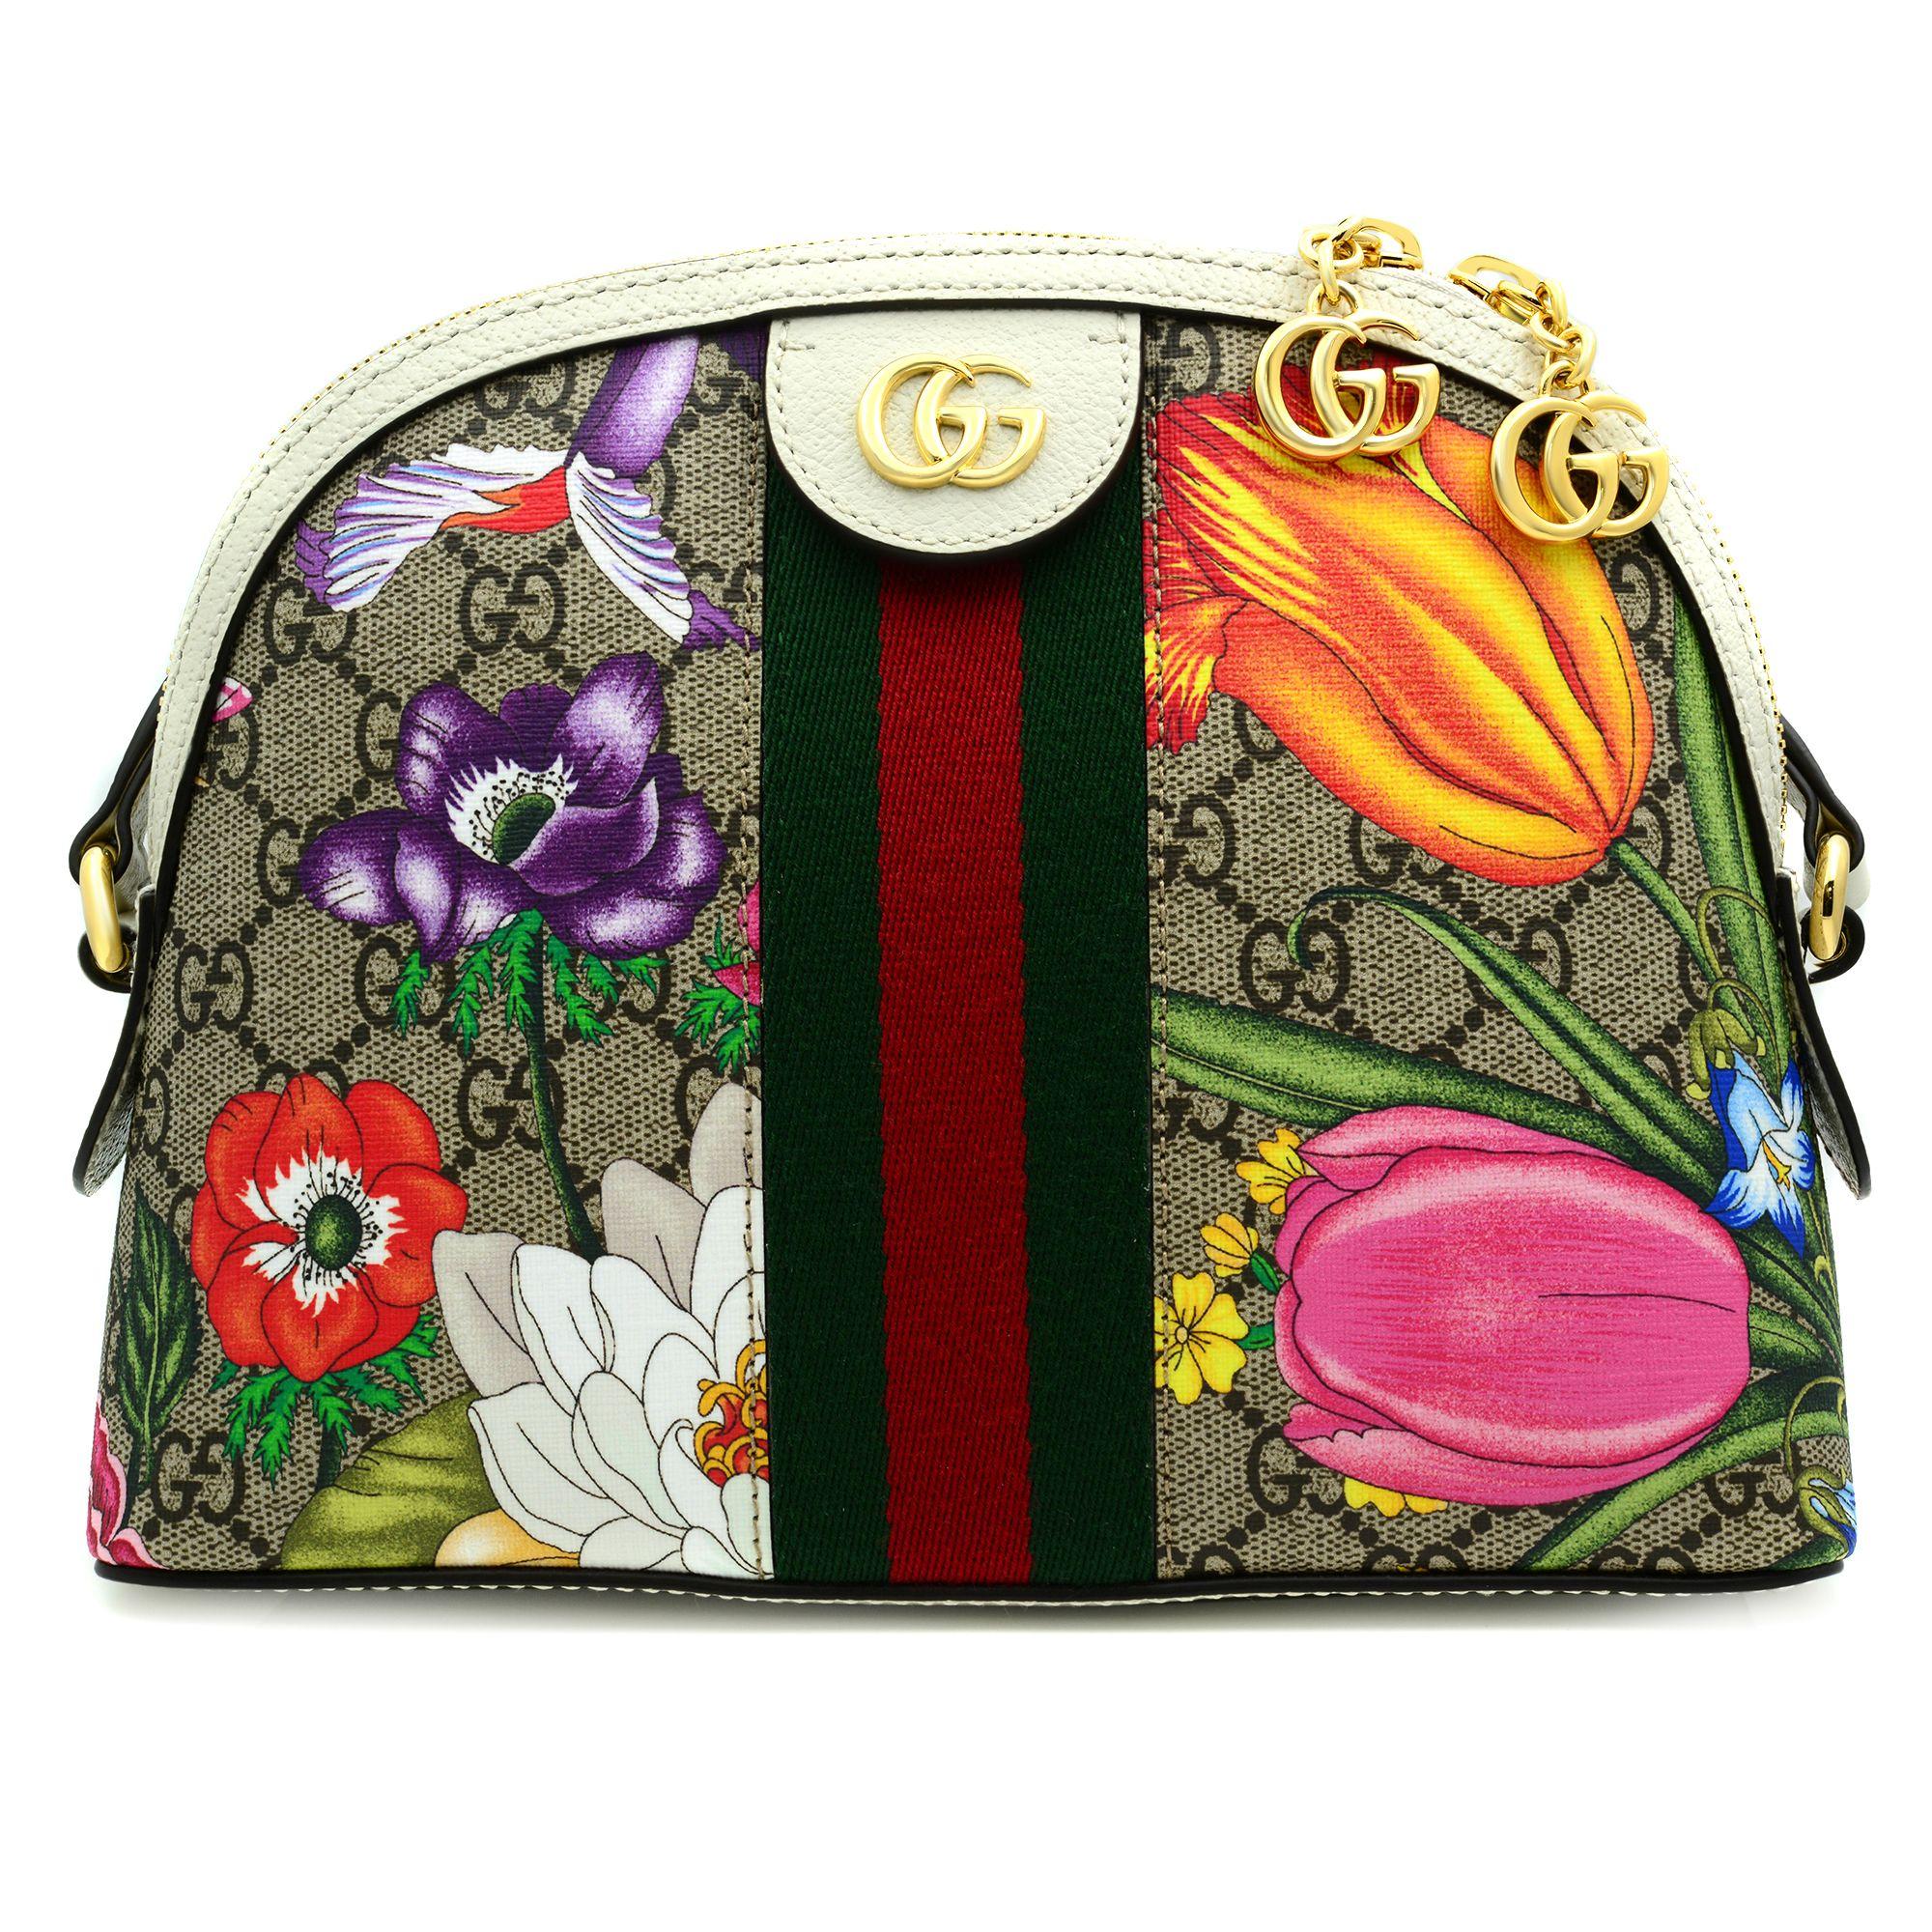 This Gucci bag is crafted from beige/ebony GG Supreme canvas with white leather trim. The features a zipper closure, flora print, green and red Web detail, zipper pullers with Double G charms, adjustable shoulder strap with 17.5